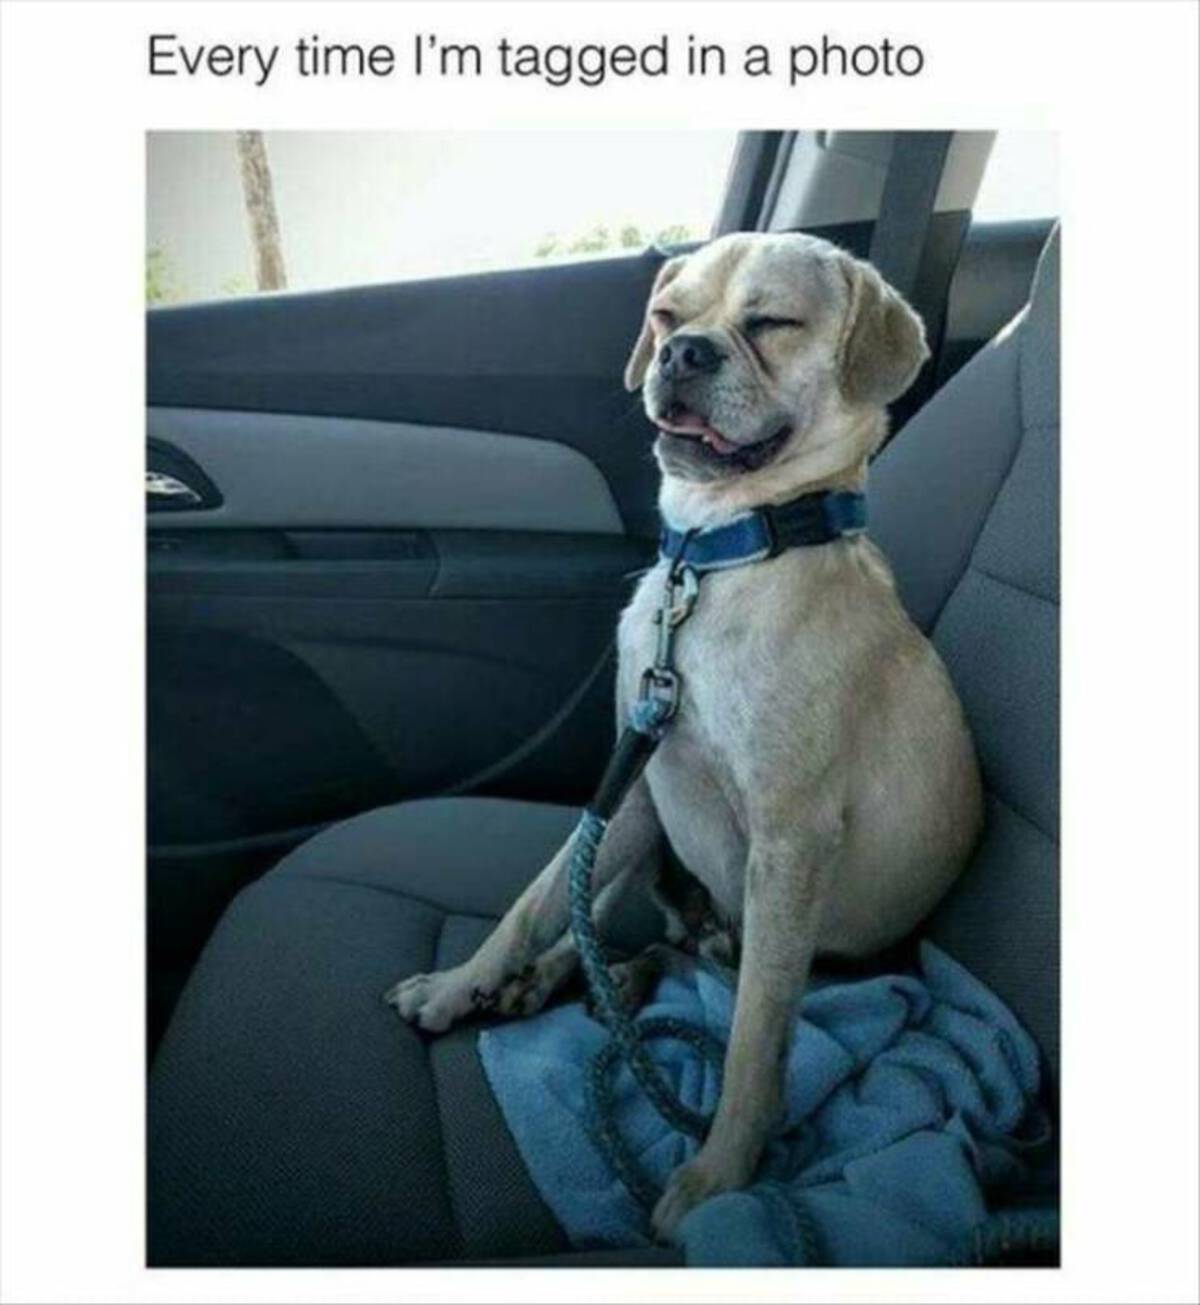 puggle - Every time I'm tagged in a photo